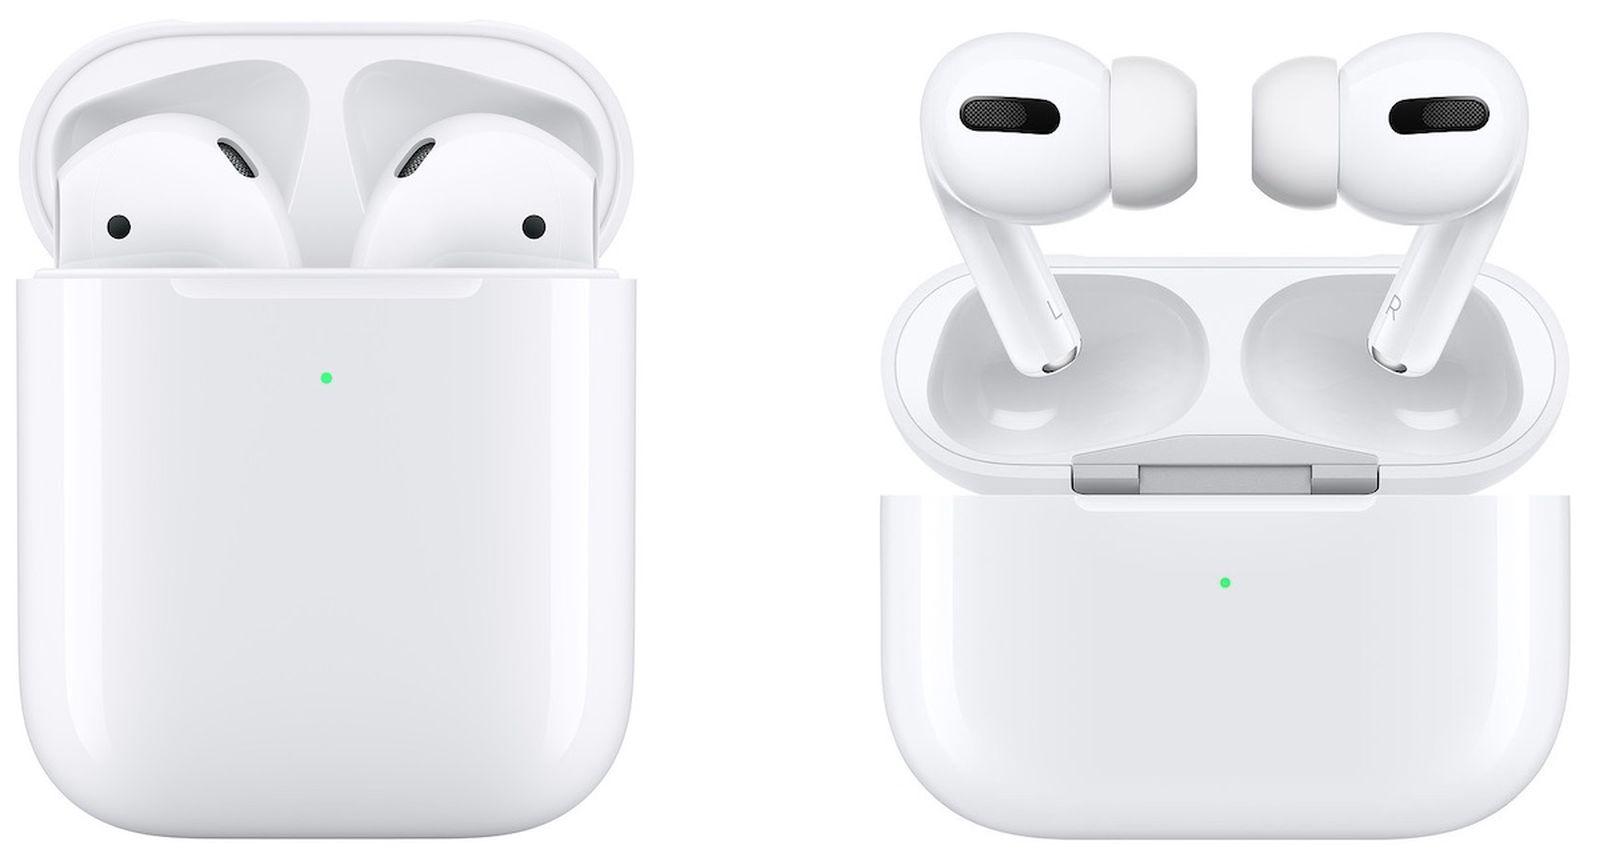 Reportedly on 'AirPod Pro Earphones -